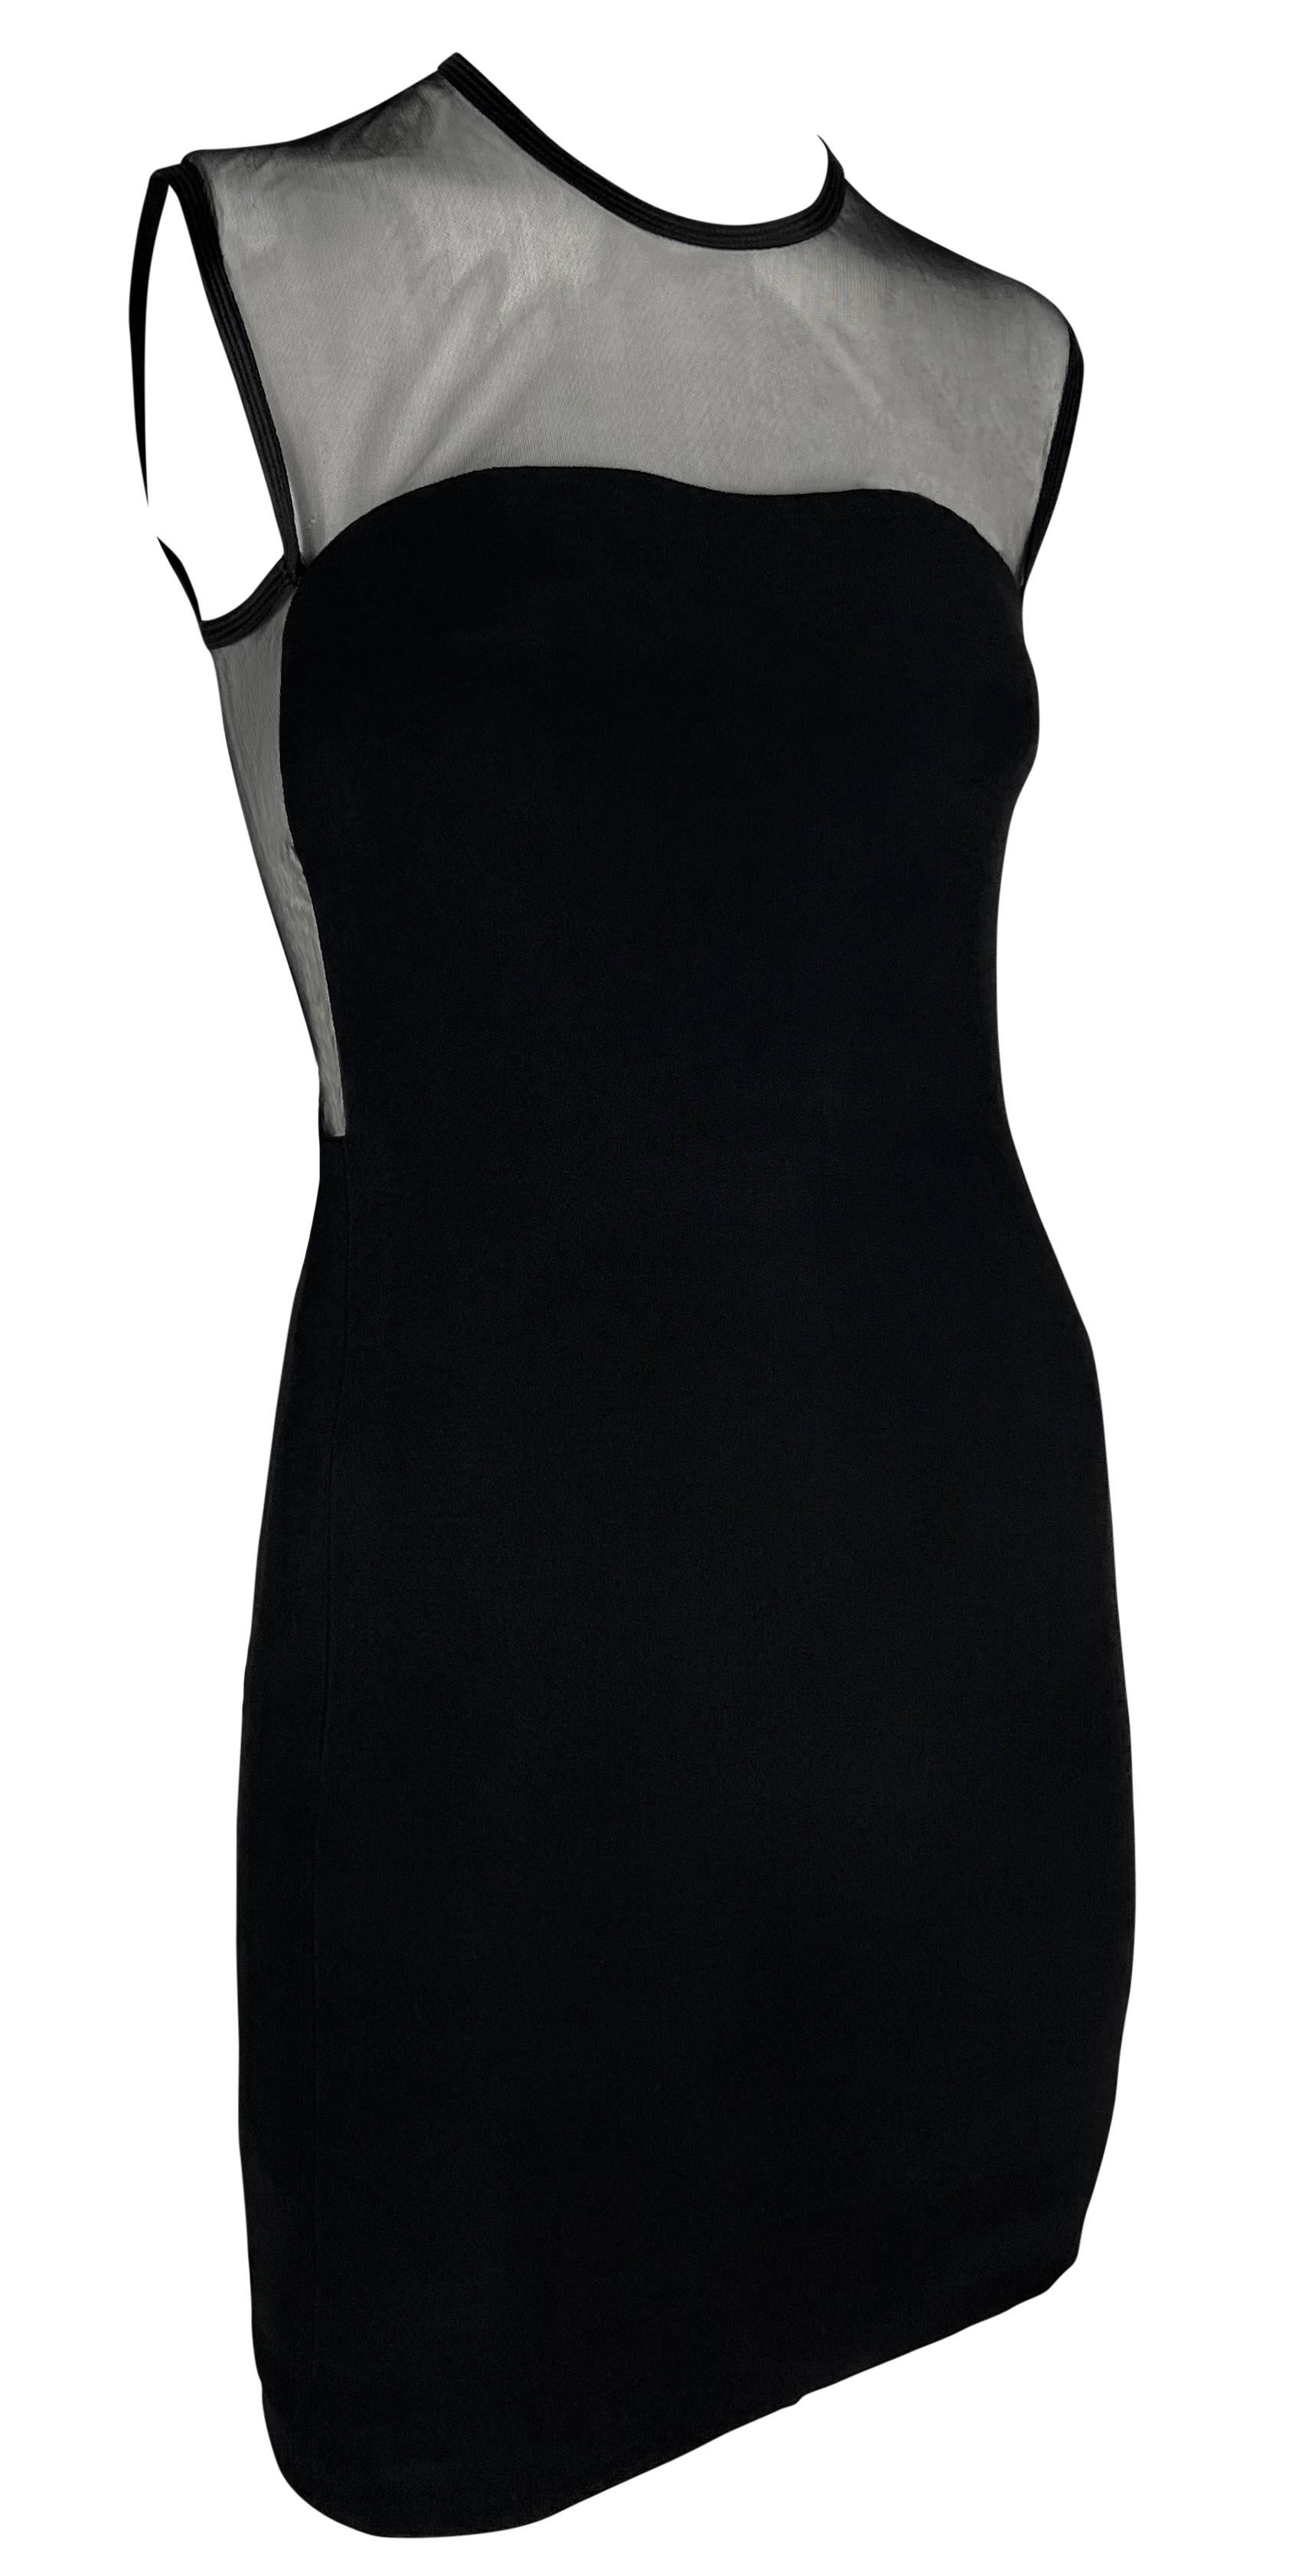 S/S 1996 Gianni Versace Black Sheer Panel Sleeveless Mesh Bodycon Dress In Good Condition For Sale In West Hollywood, CA